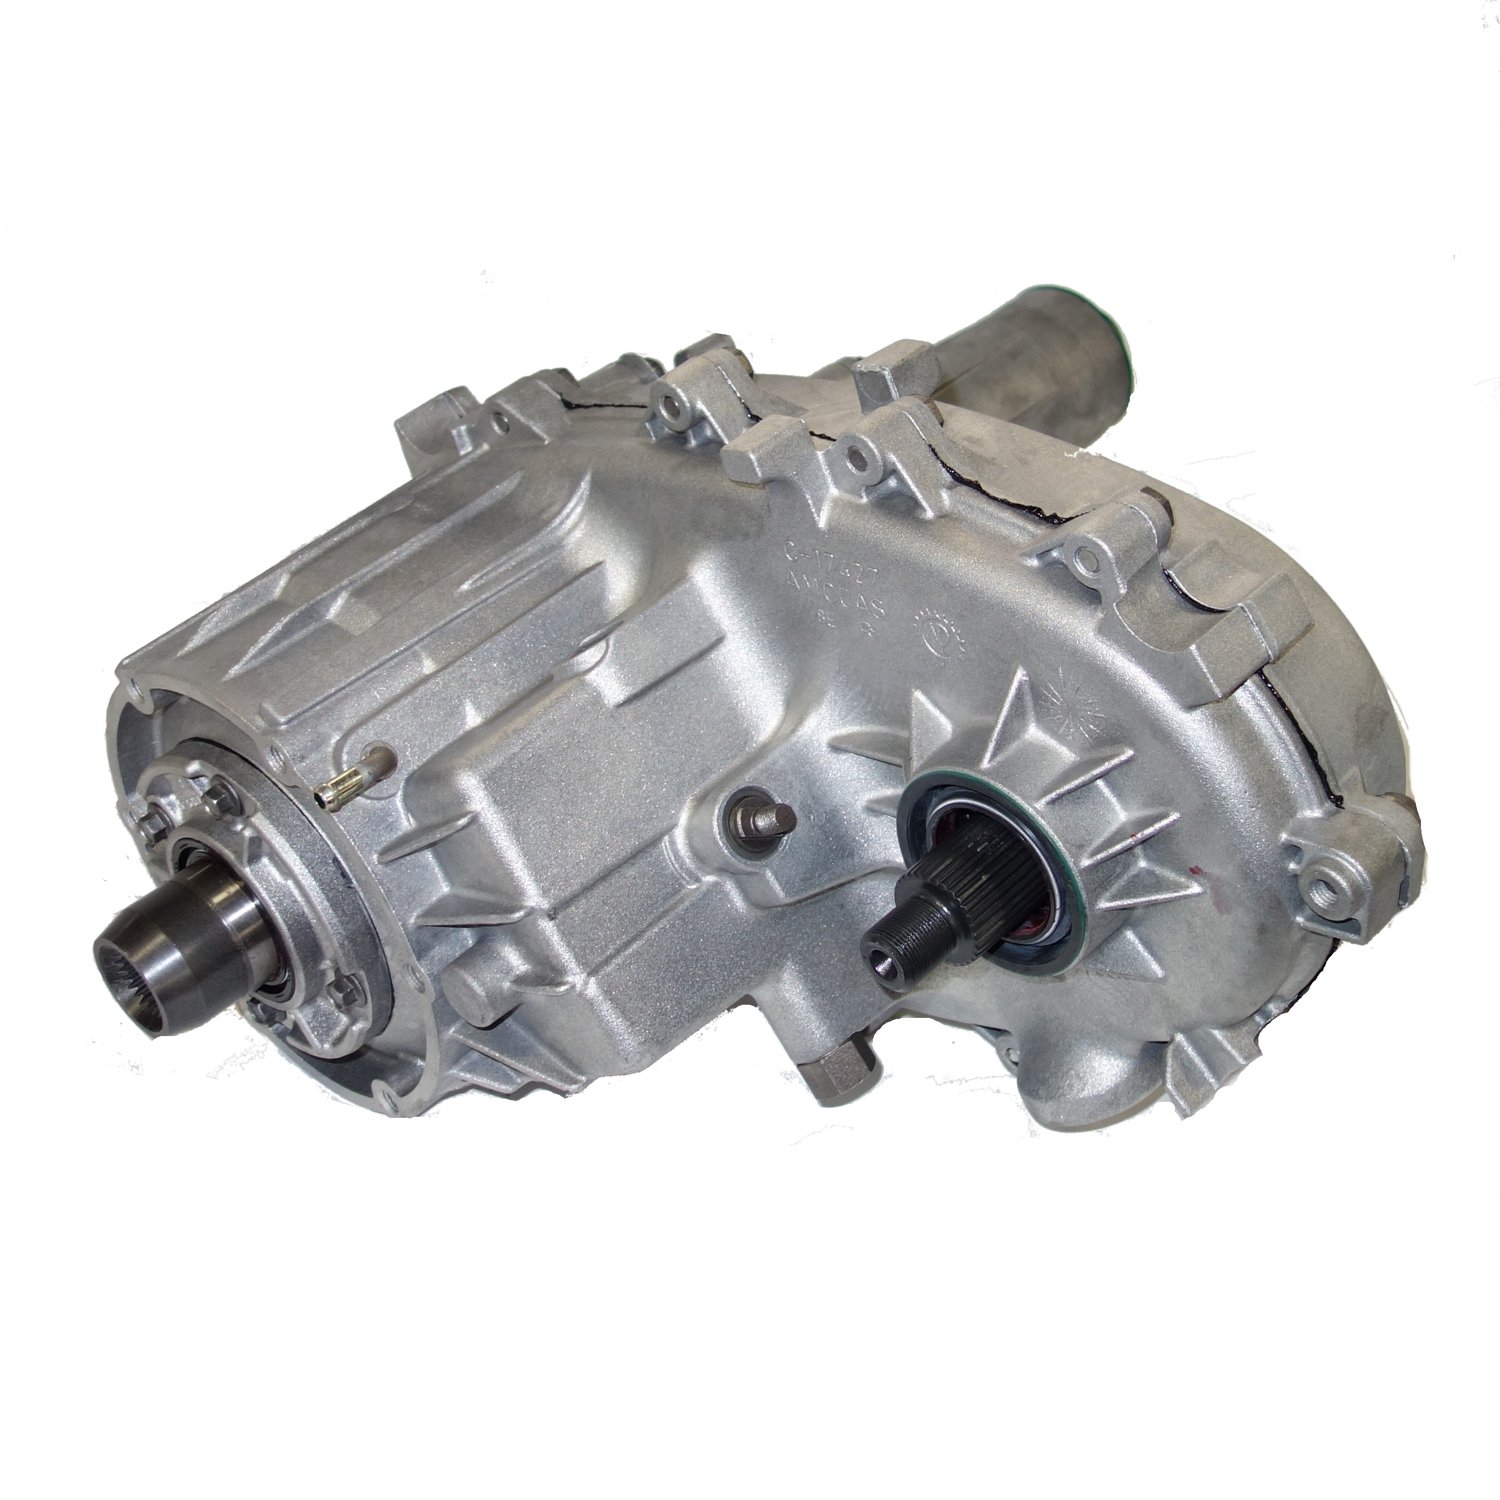 Remanufactured NP241 Transfer Case for GM 95-02 K-series